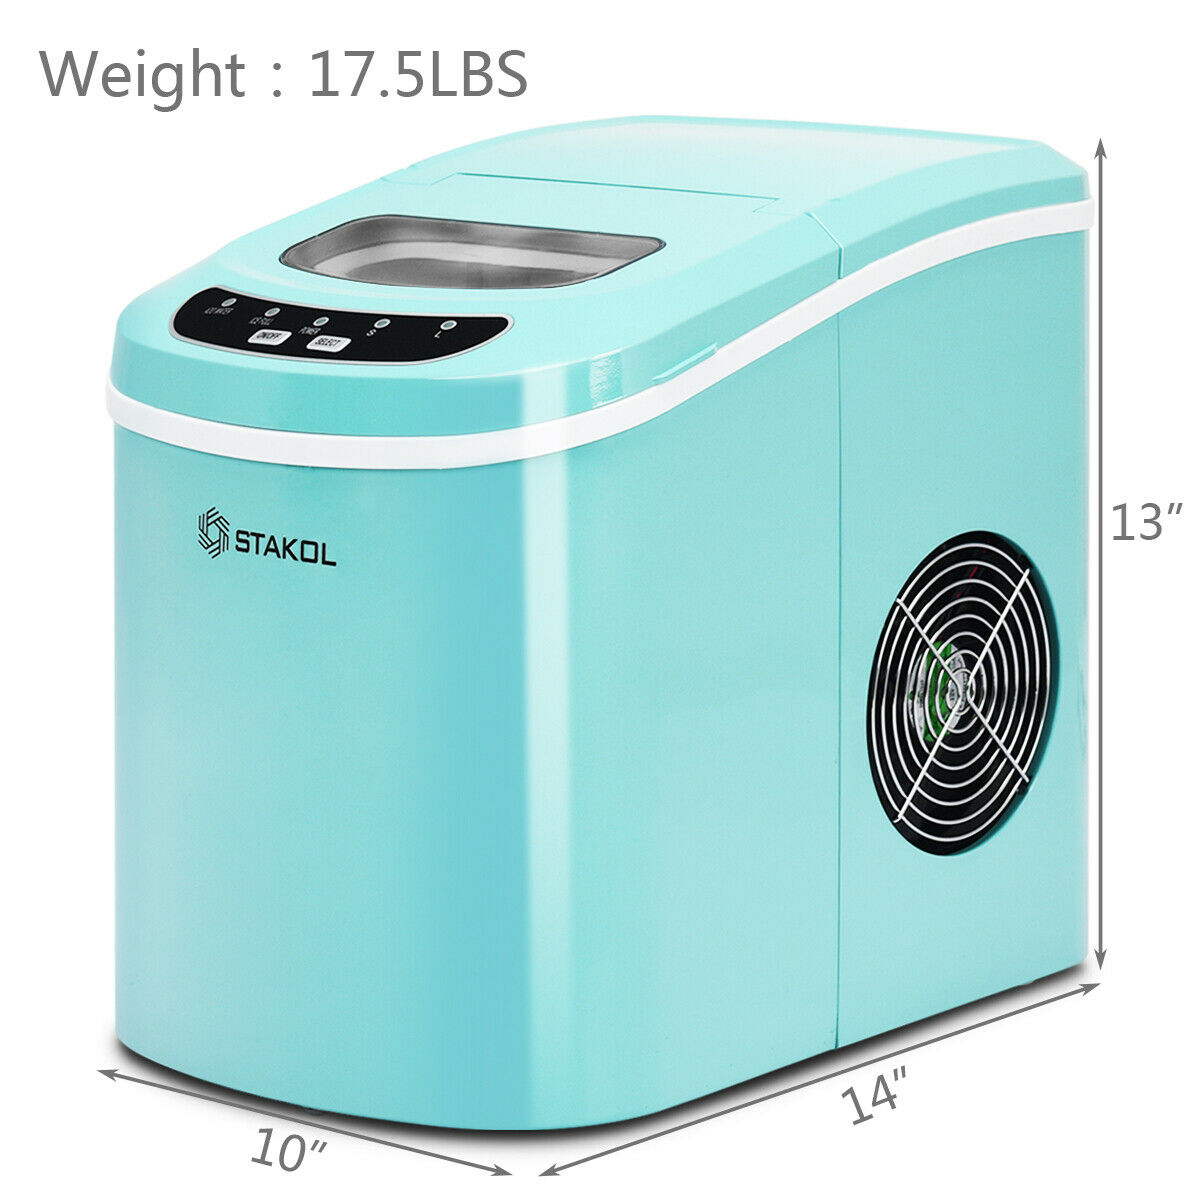 Stakol Portable Compact Electric Ice Maker Machine Mini Cube 26lb/Day Mint Green - image 3 of 10